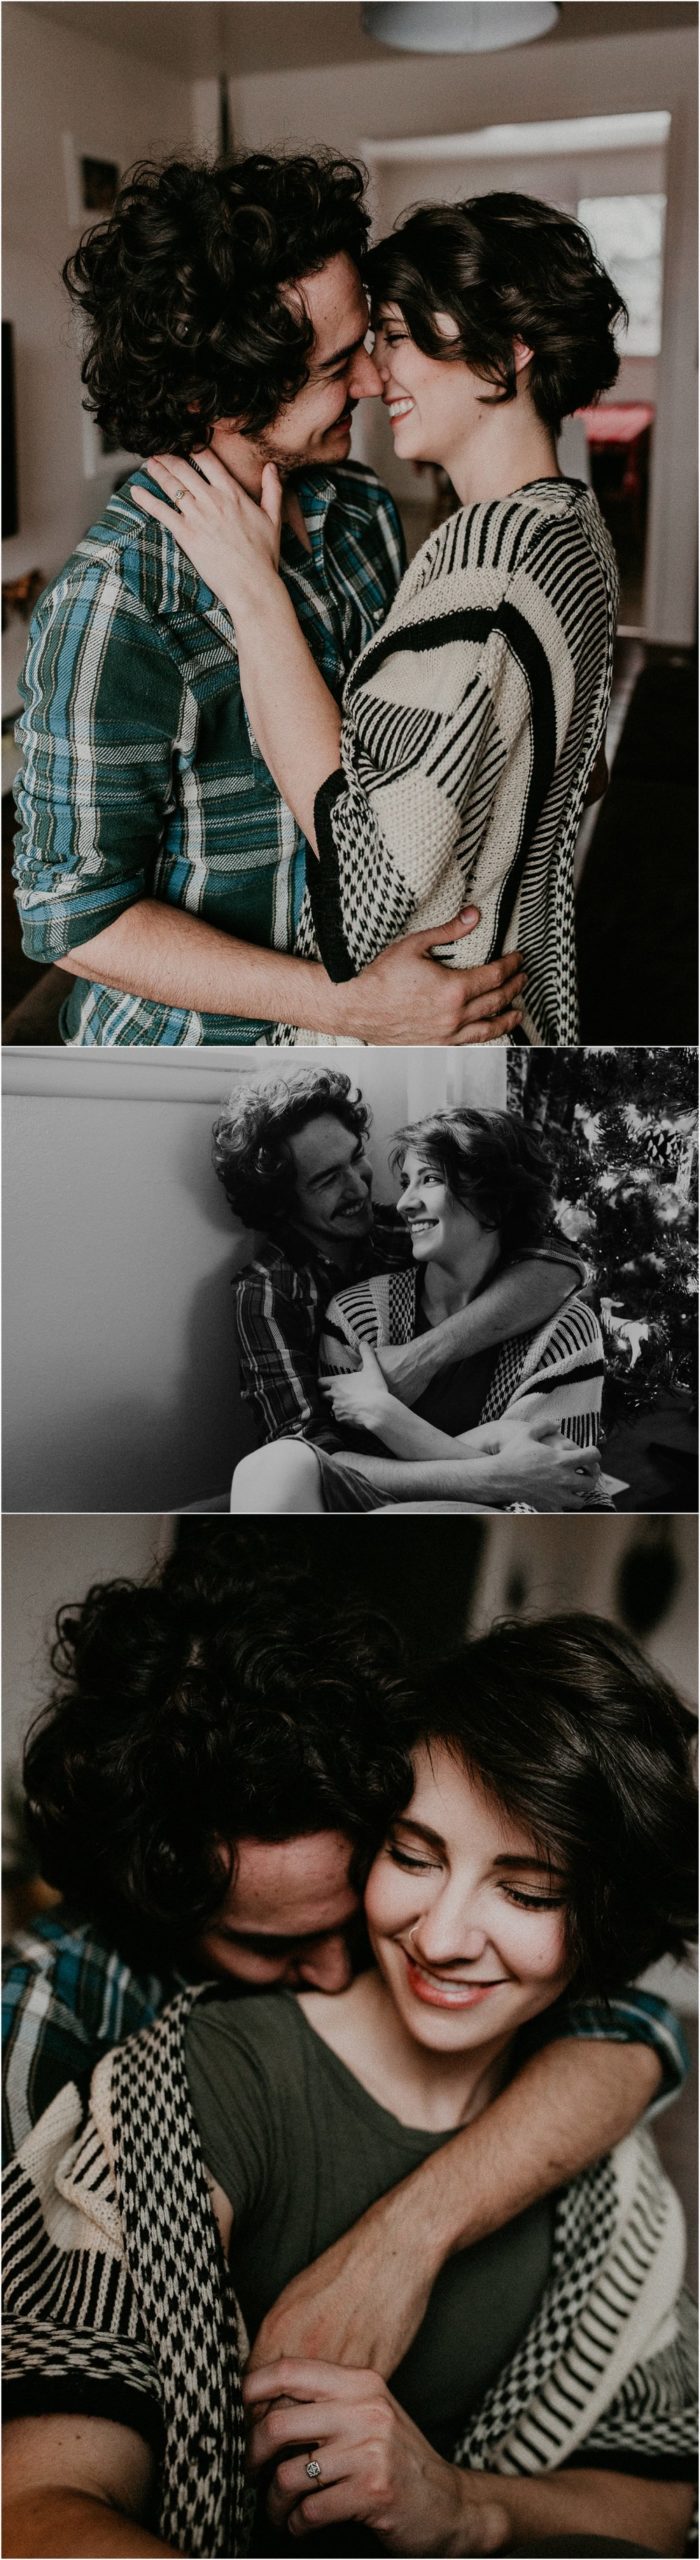 Boise Engagement Wedding Photographer Lifestyle Couples Session In home Dogs Christmas Winter Laughter Love 